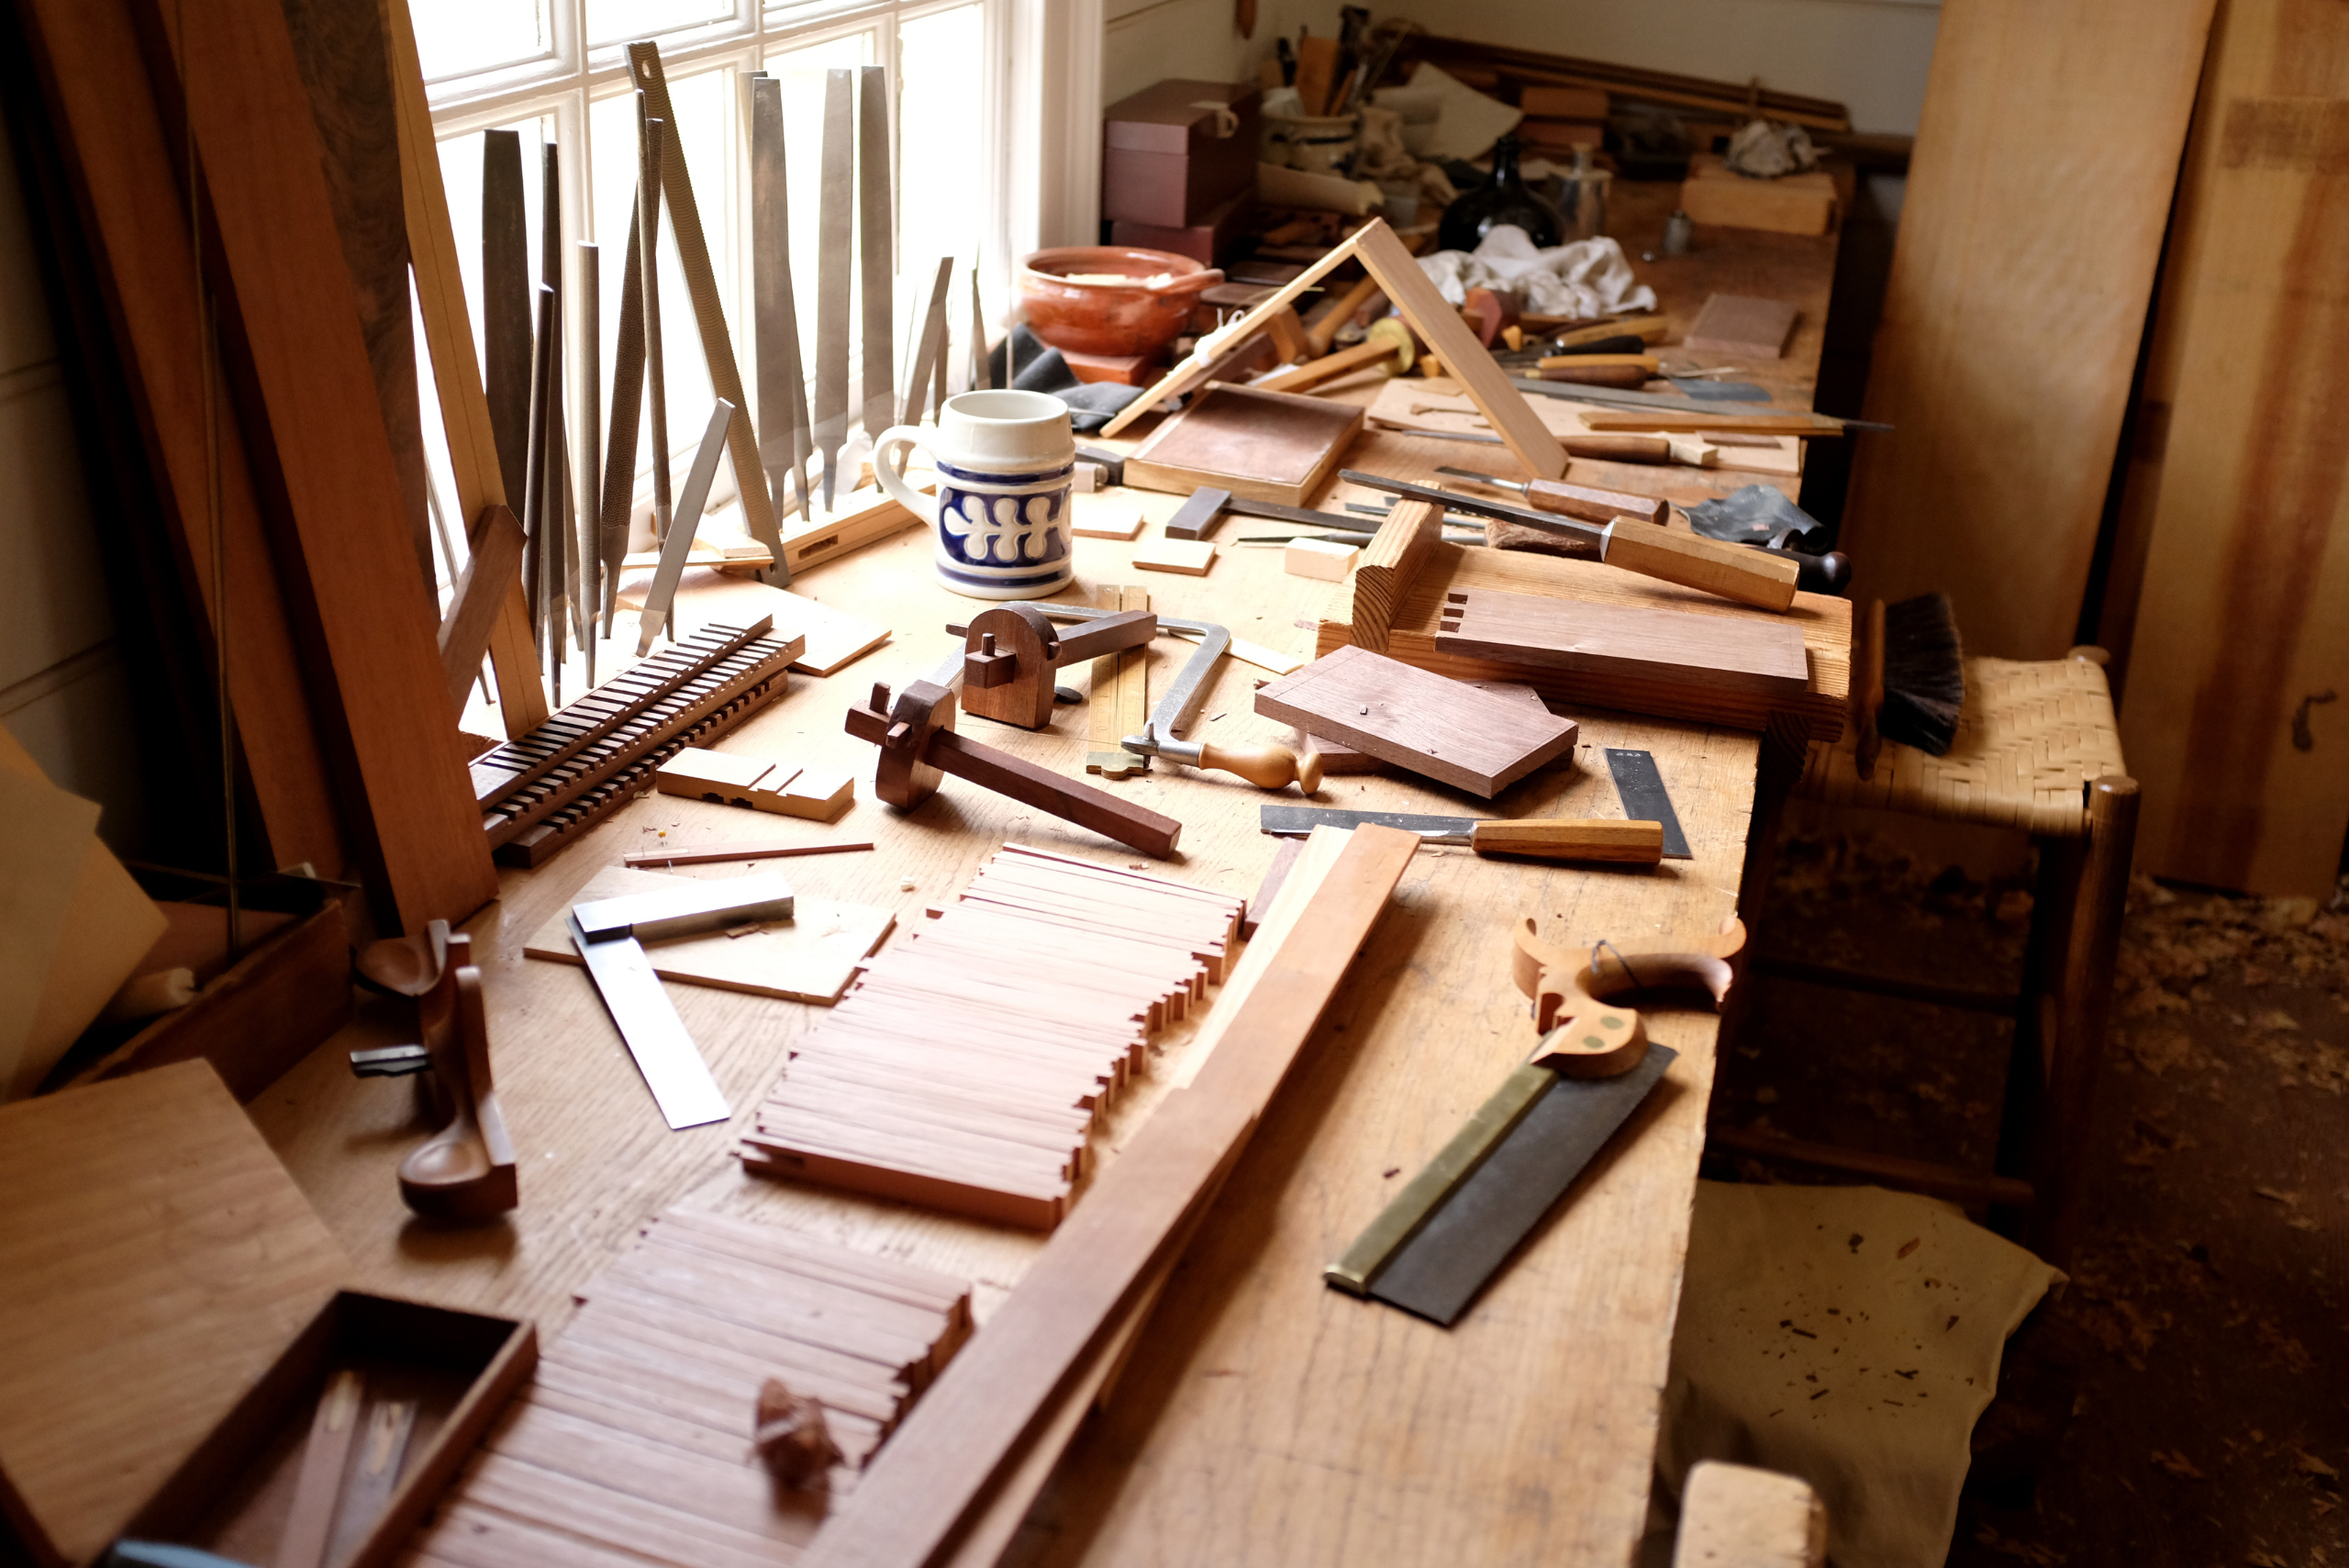 An assortment of materials and tools in a workshop.